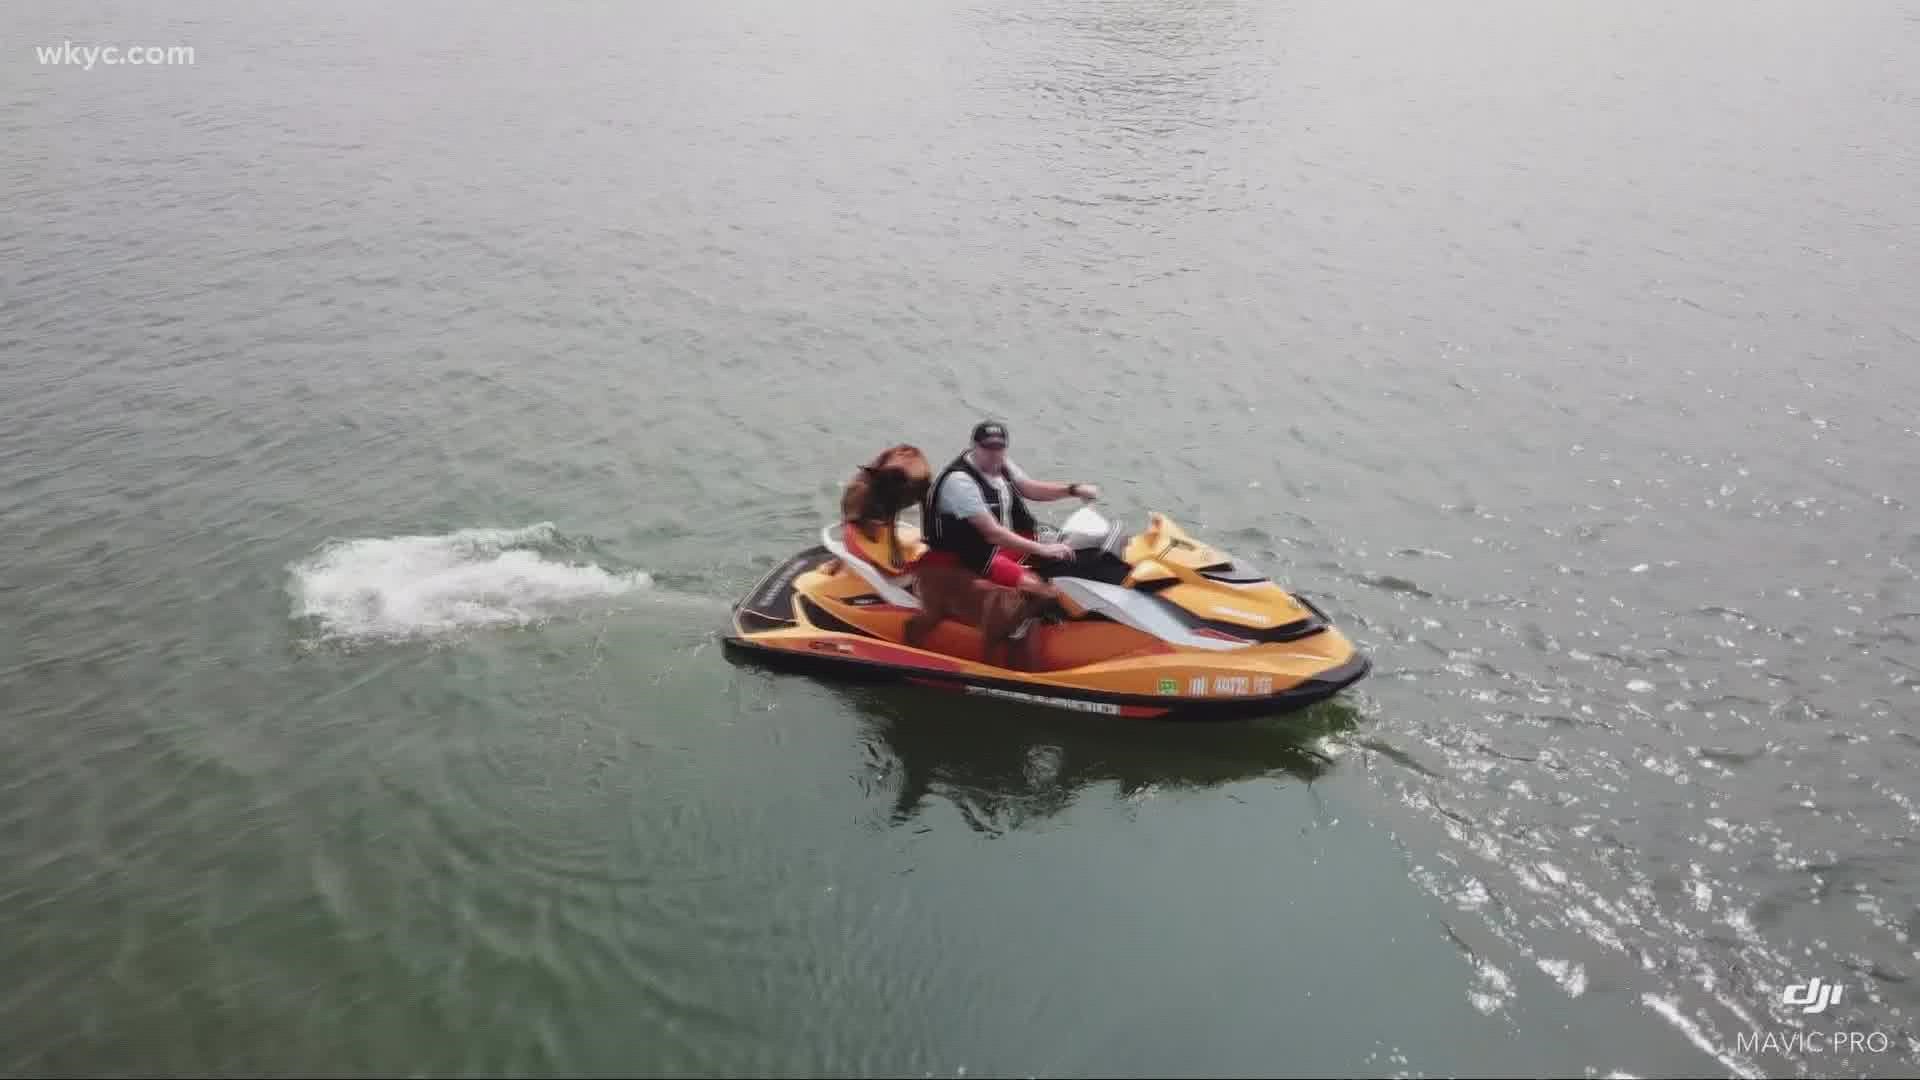 Det. Jeff Wells loves to take his dogs Bonkers and Lily out on a jet ski ride. The dogs love being on the water and treat it like it's a car ride.